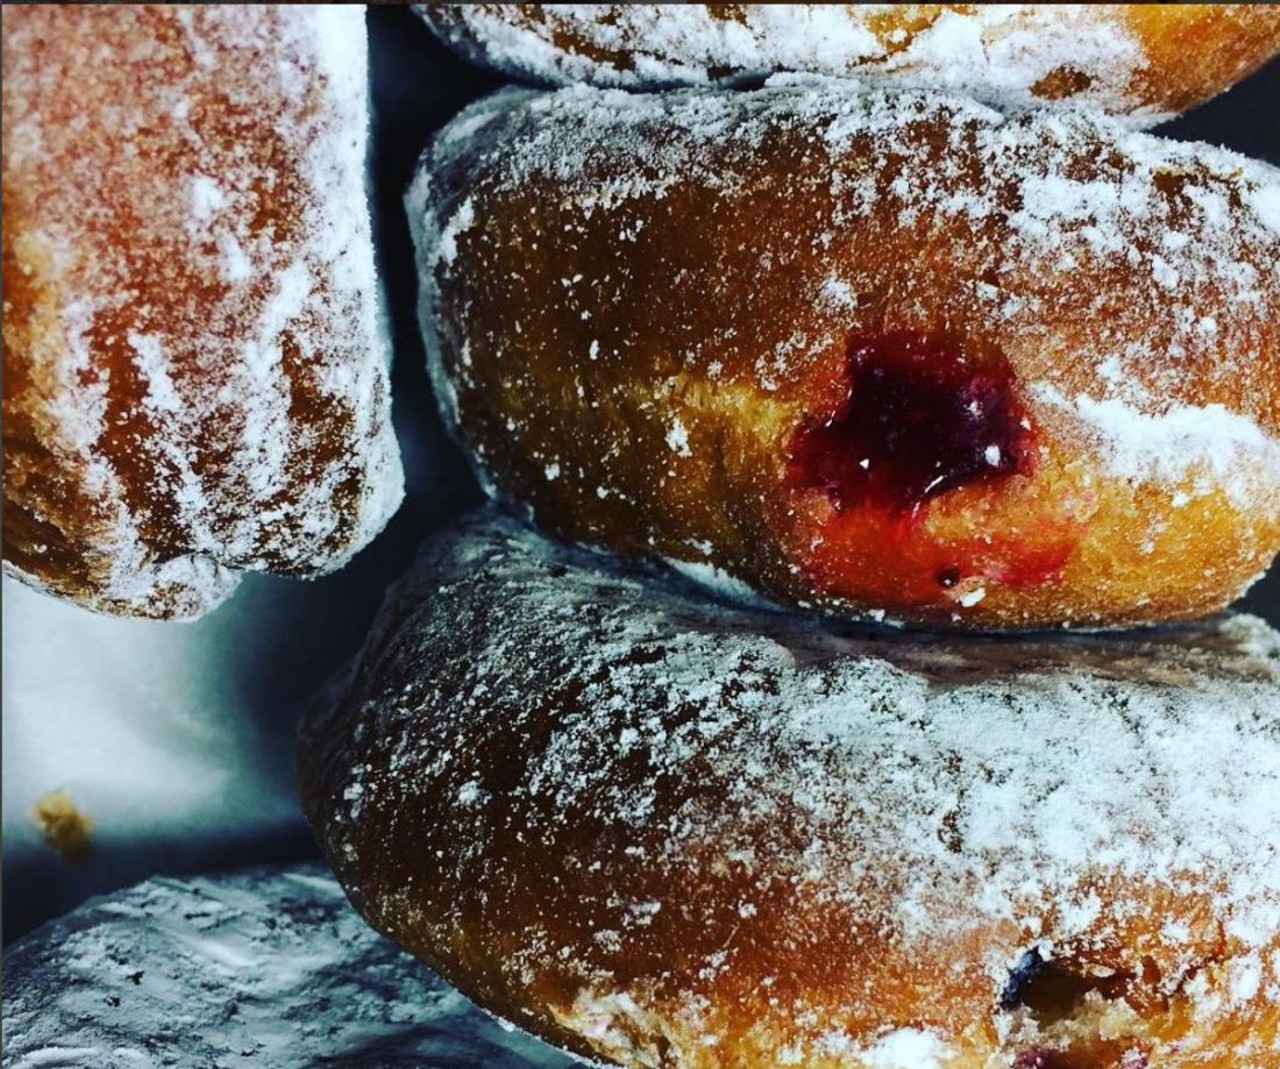 Apple Fritter Donut Shop
Full disclosure: The Metro Times editorial staff regularly imbibes donuts from the Apple Fritter. Their traditional paczki are worth a try.
741 E. Nine Mile Rd., Ferndale; 248-545-7295. Photo via Instagram user nataliemarion.